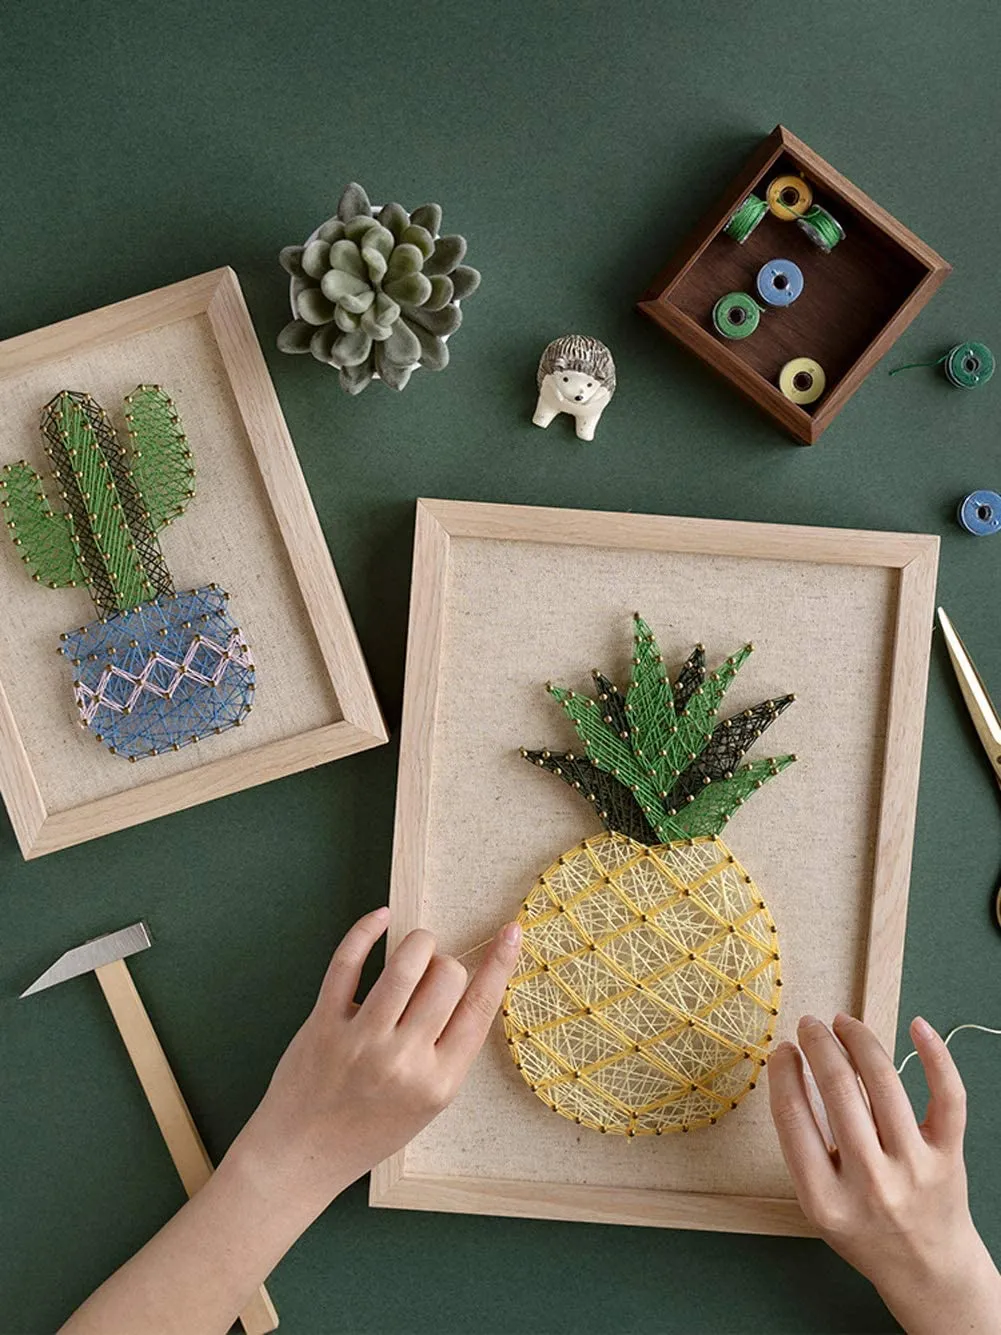 Pineapple string art in a wooden frame and a cactus string art piece in a wooden frame